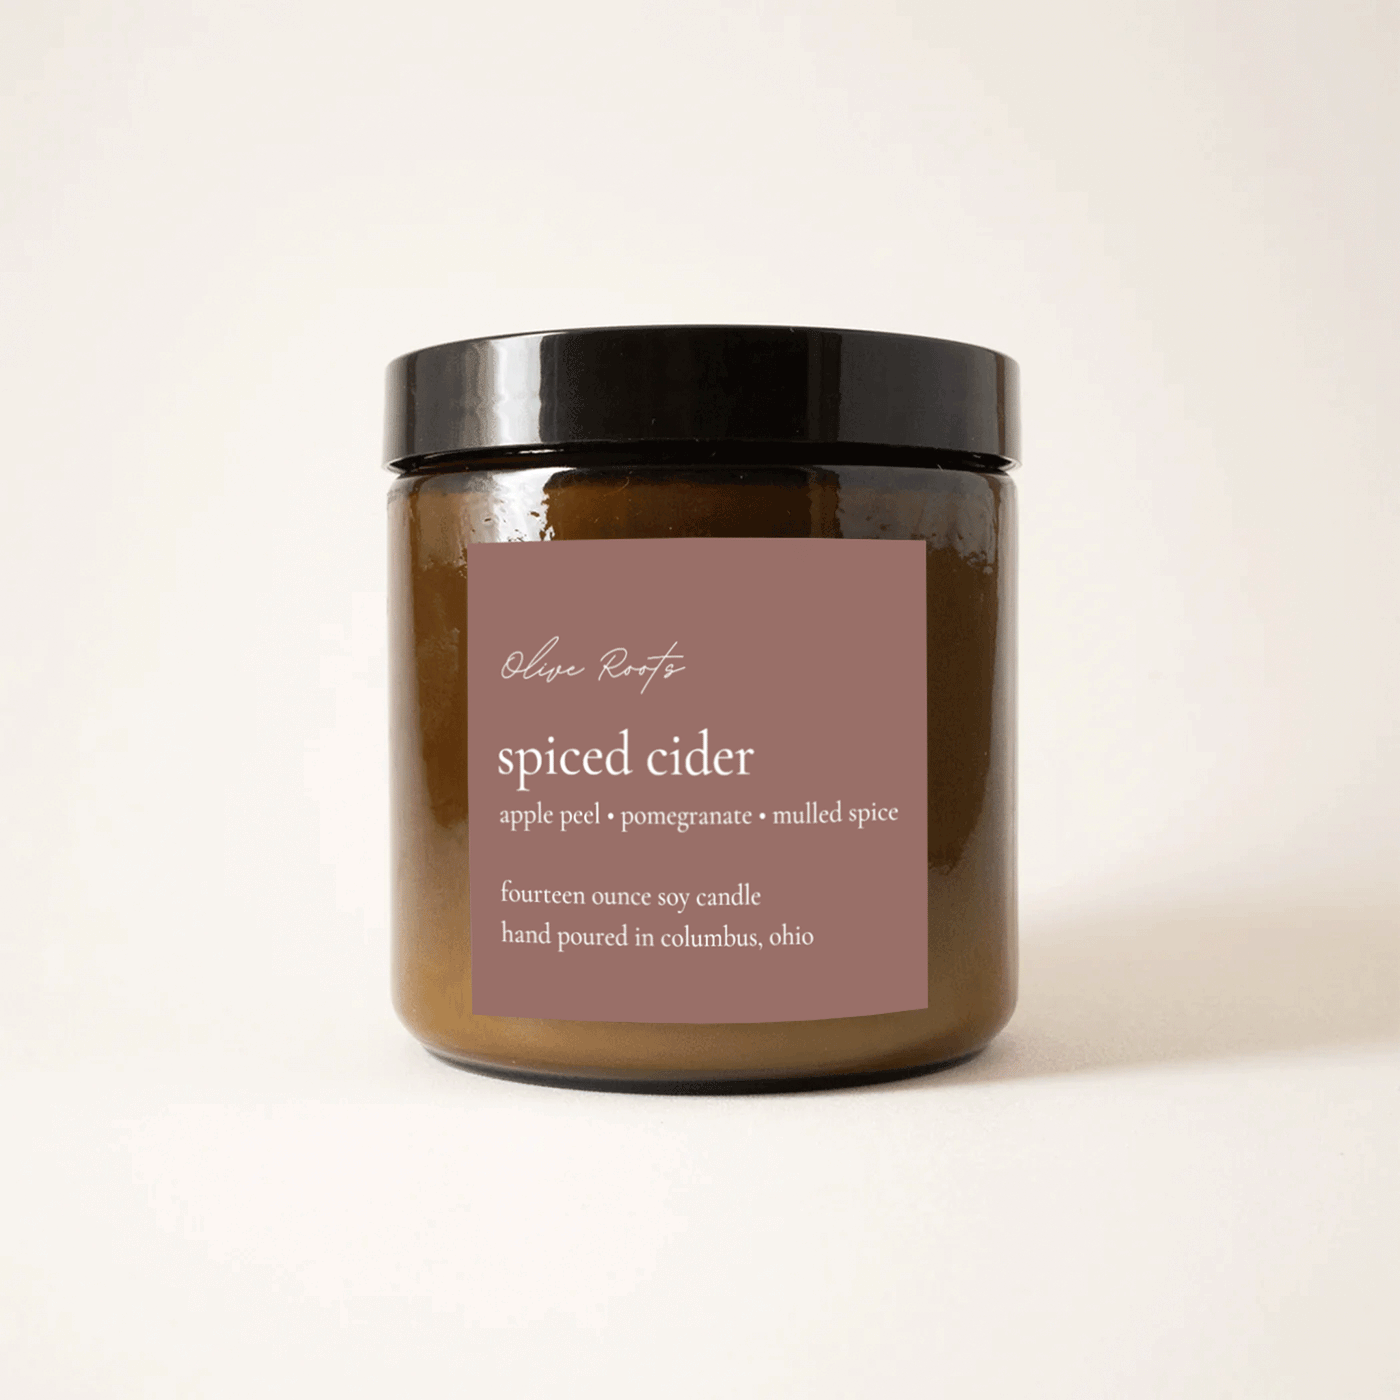 Pomegranate Cider Soy Candle | Fast Shipping